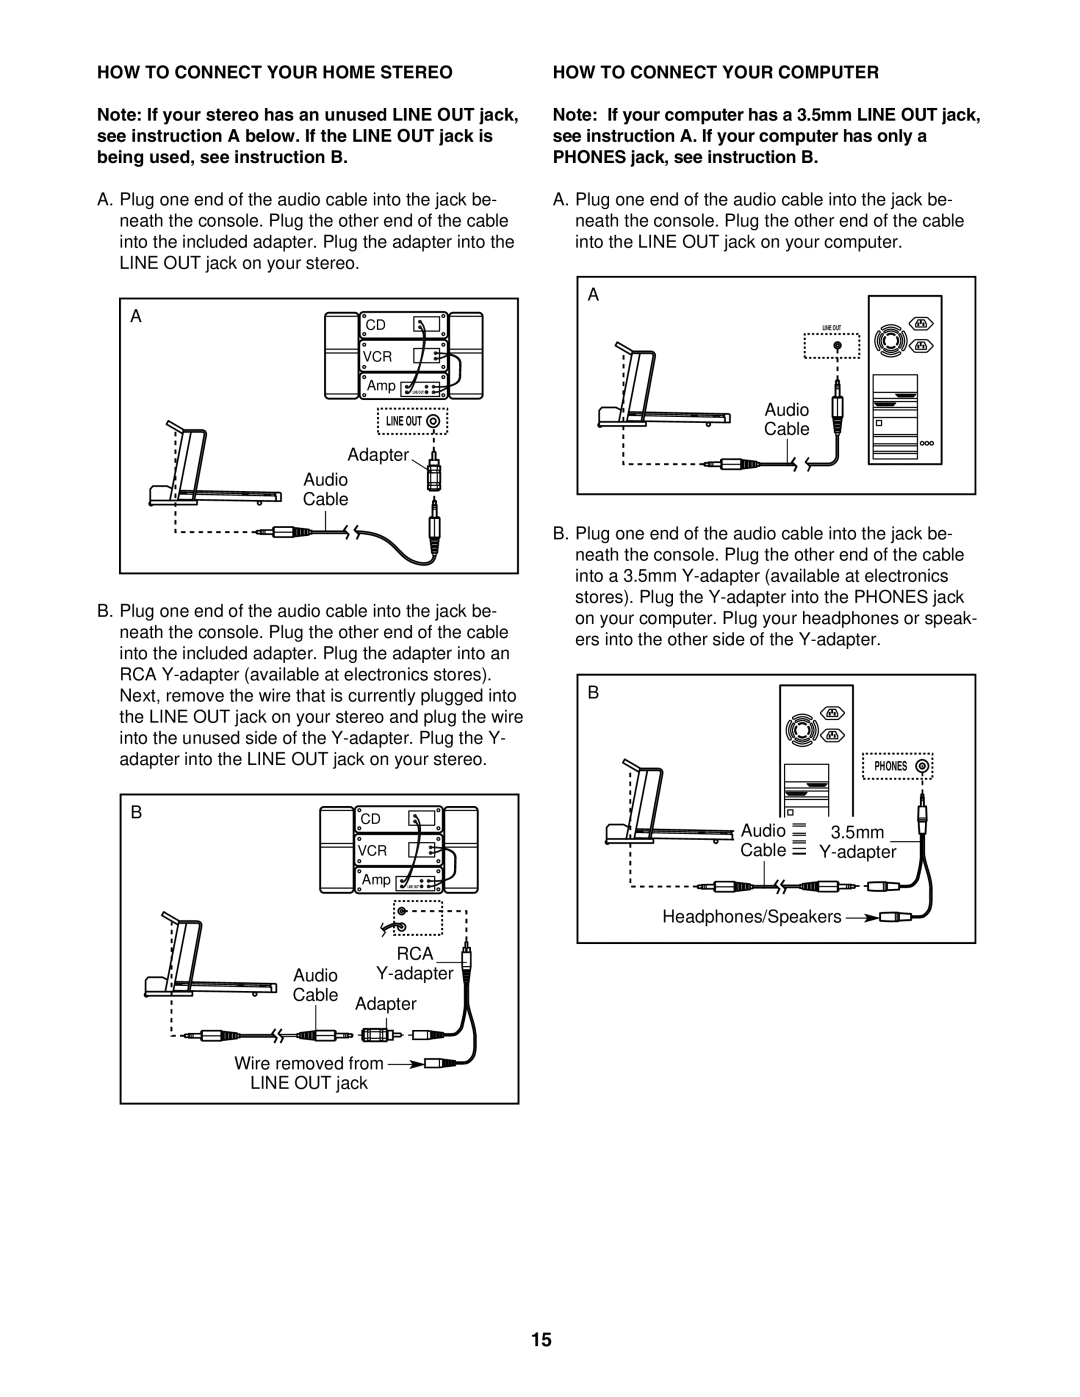 Image IMTL39526 user manual HOW to Connect Your Home Stereo HOW to Connect Your Computer 